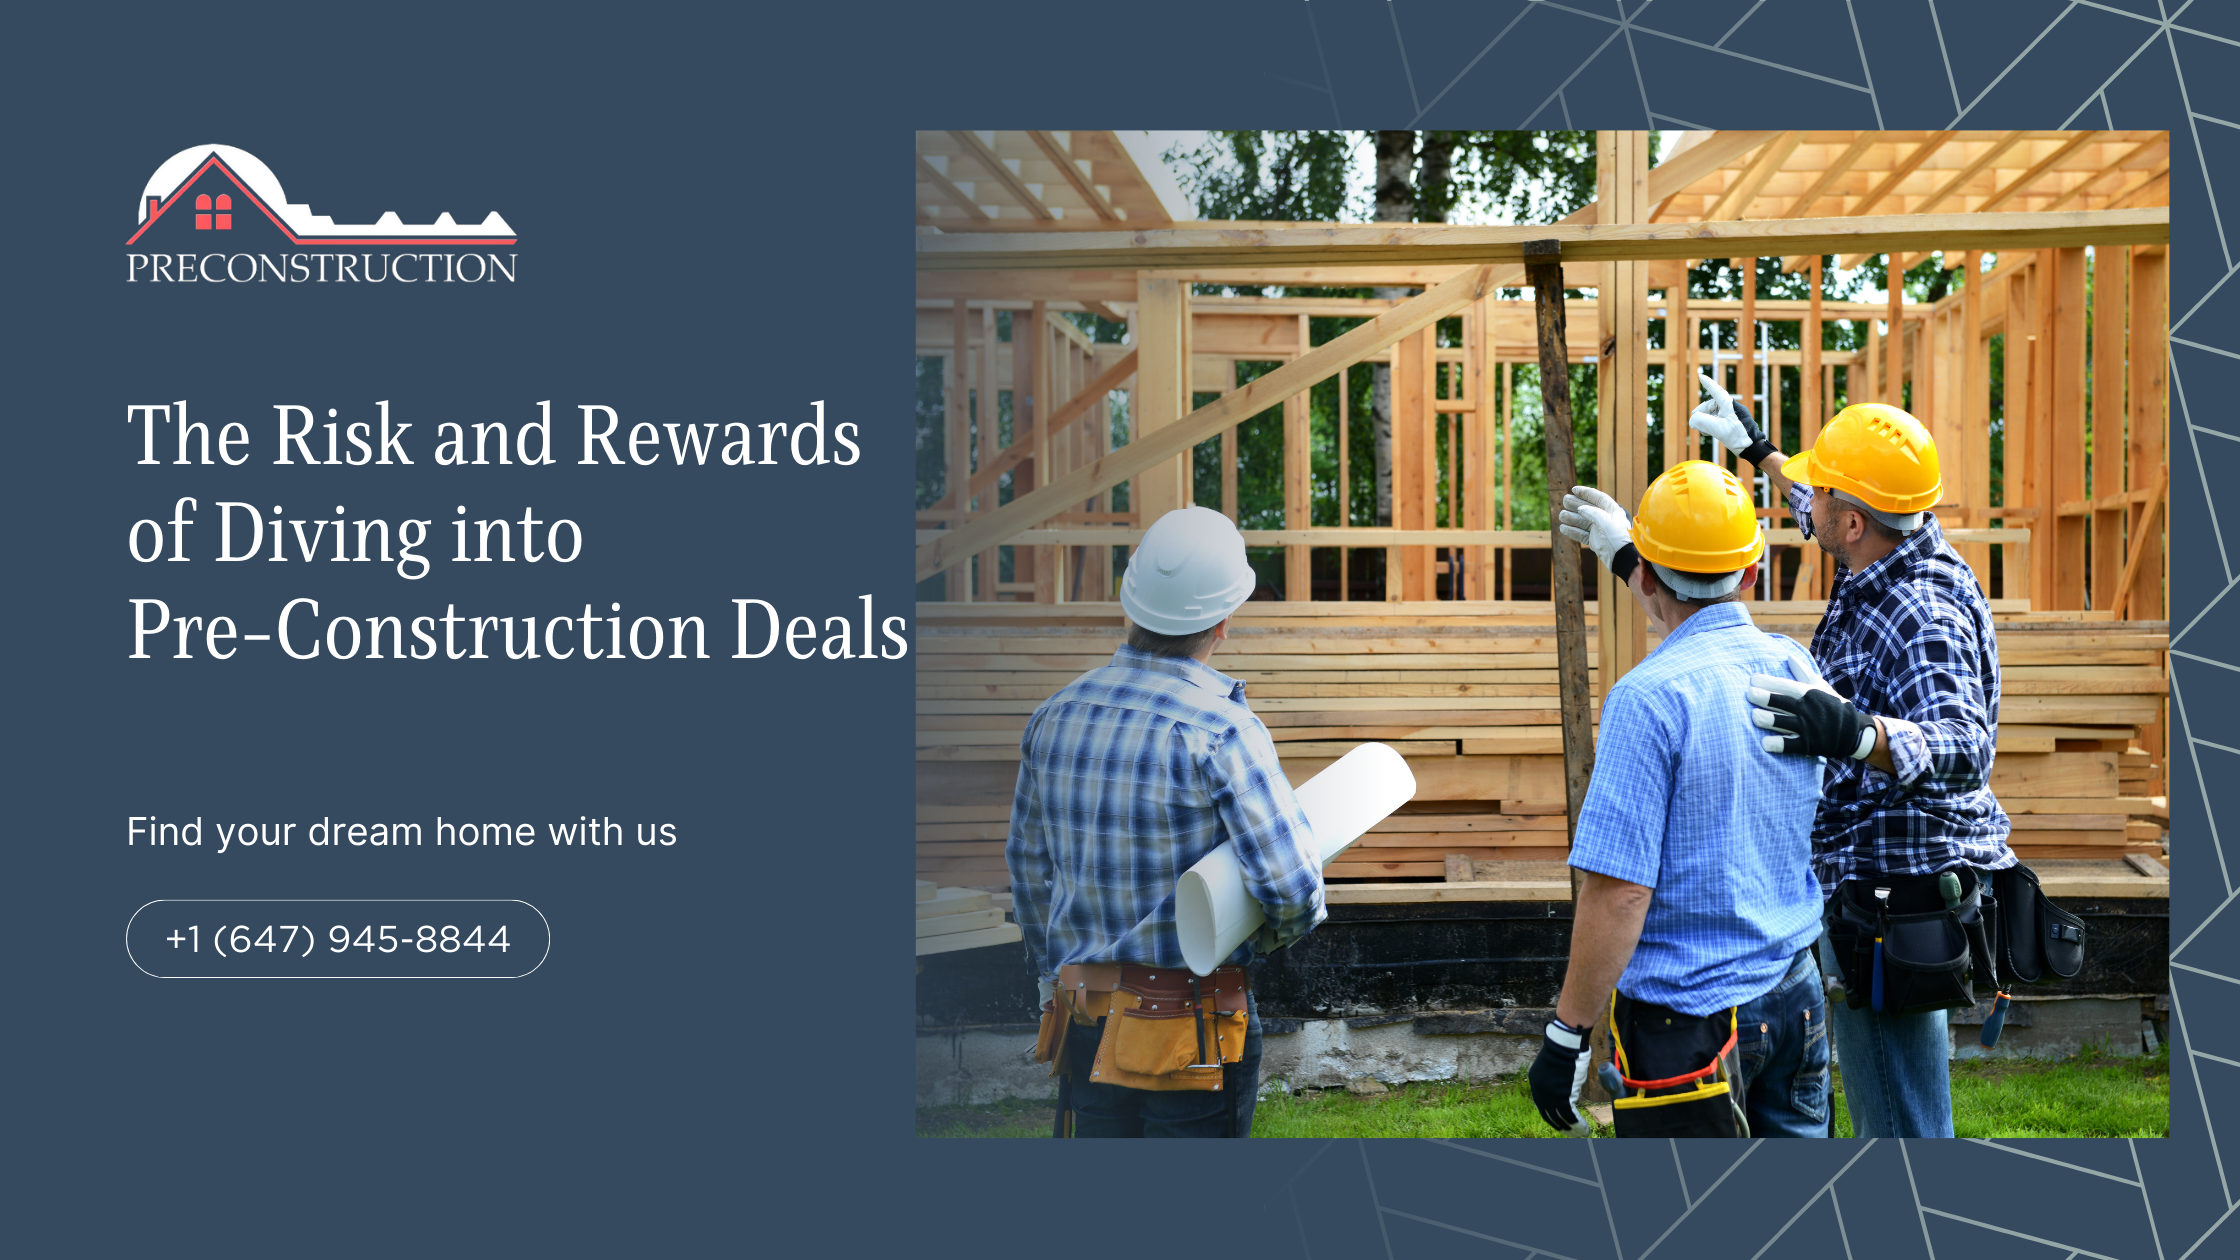 The Risk and Rewards of Diving into Pre-Construction Deals